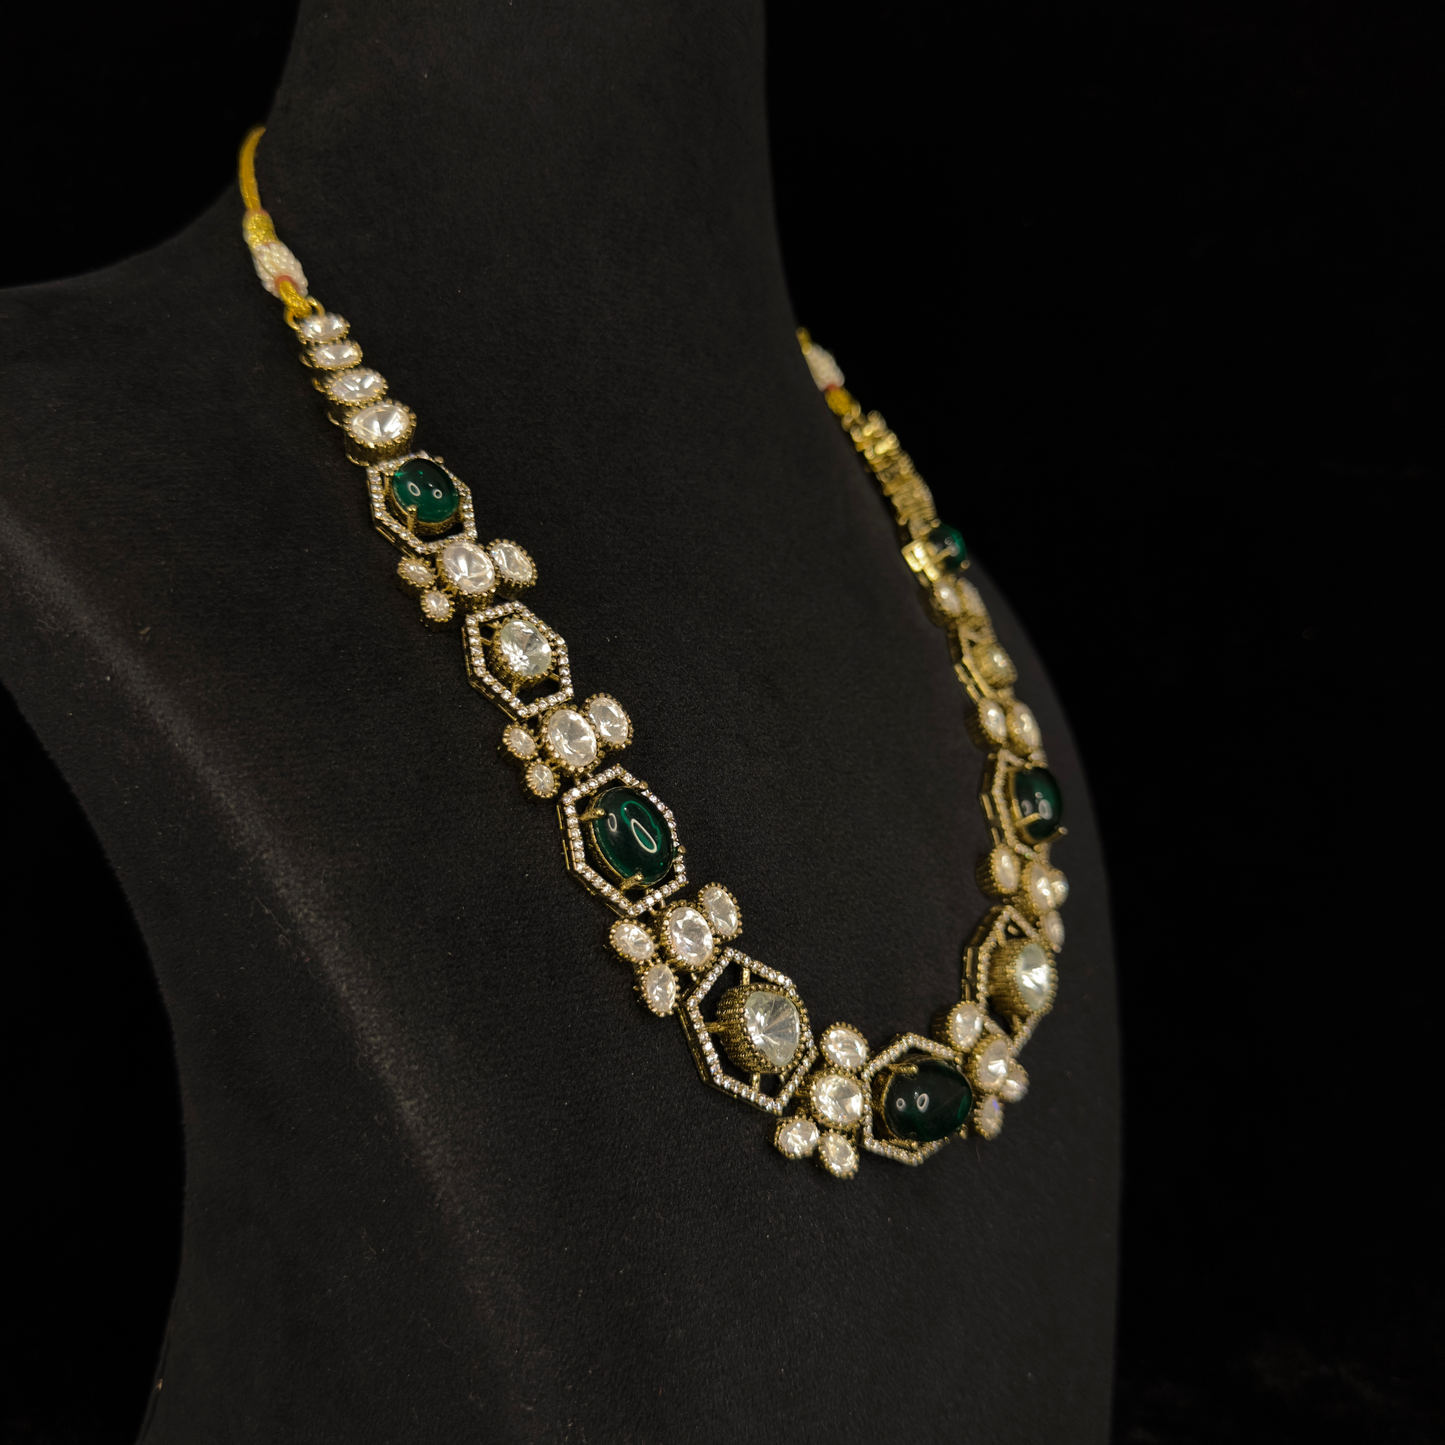 Antique Victorian Necklace with Polki Kundan Stones and earrings